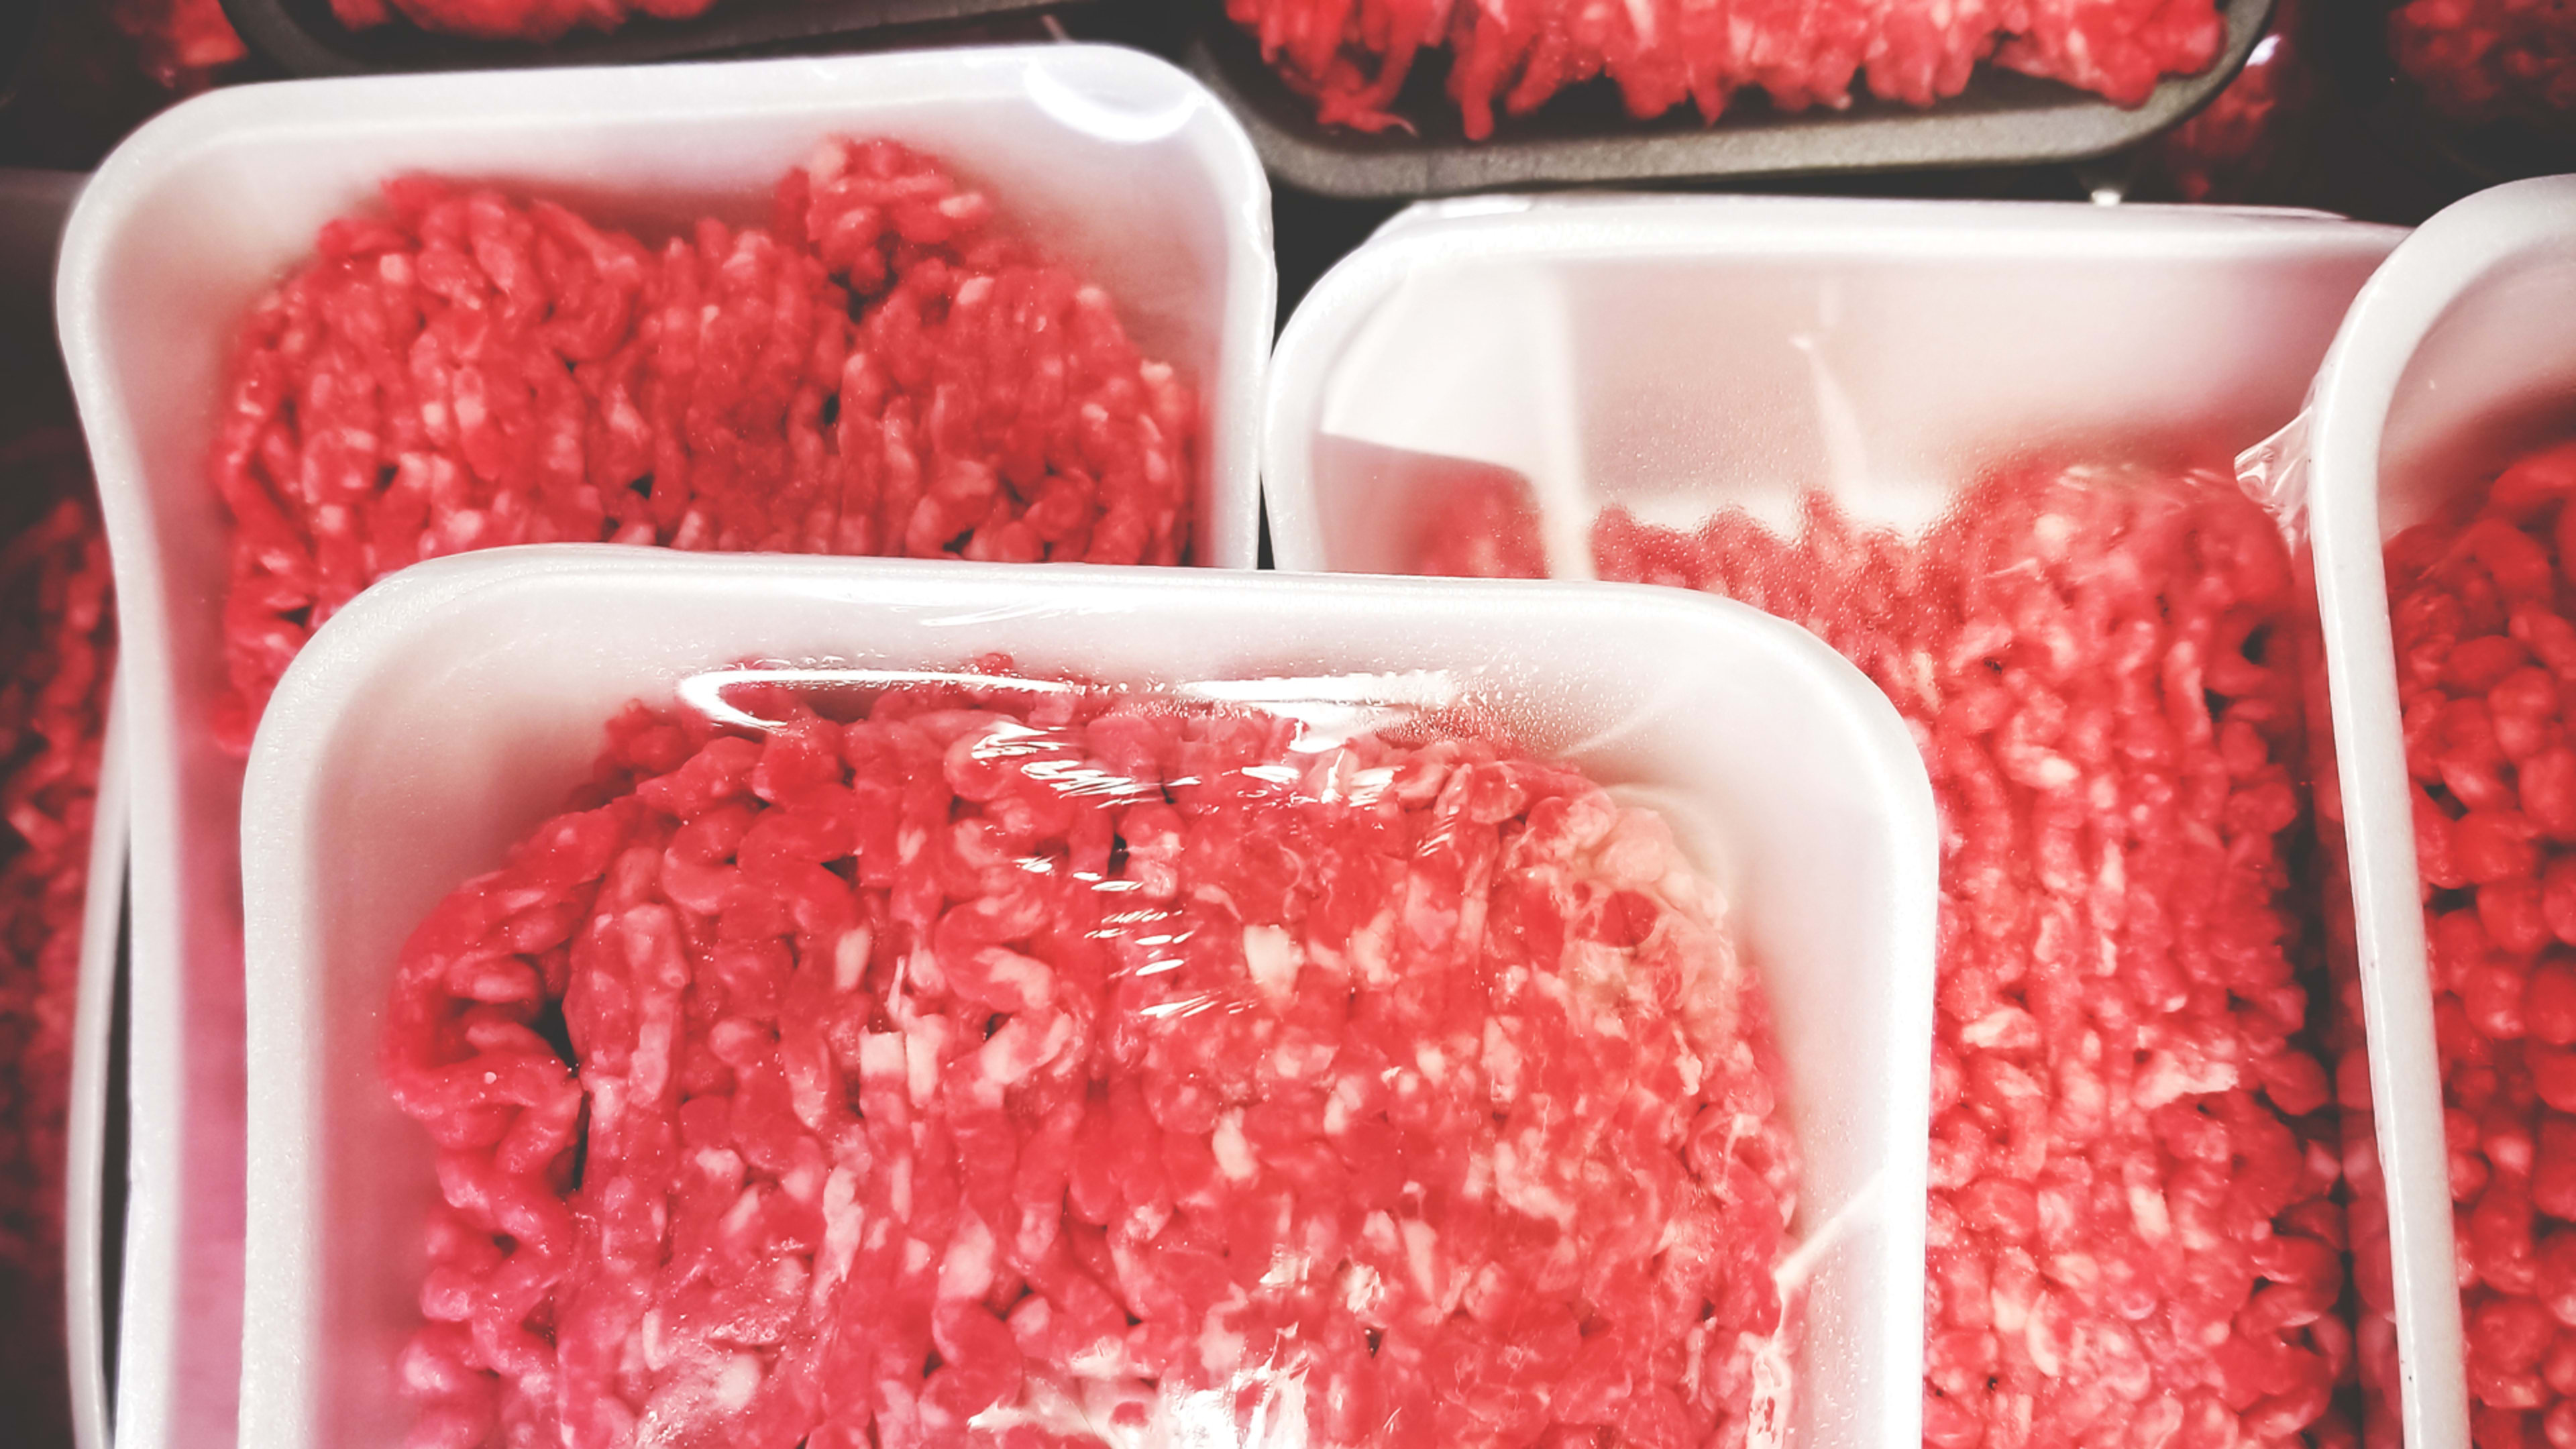 E. coli ground beef outbreak: 11 products to avoid after recall